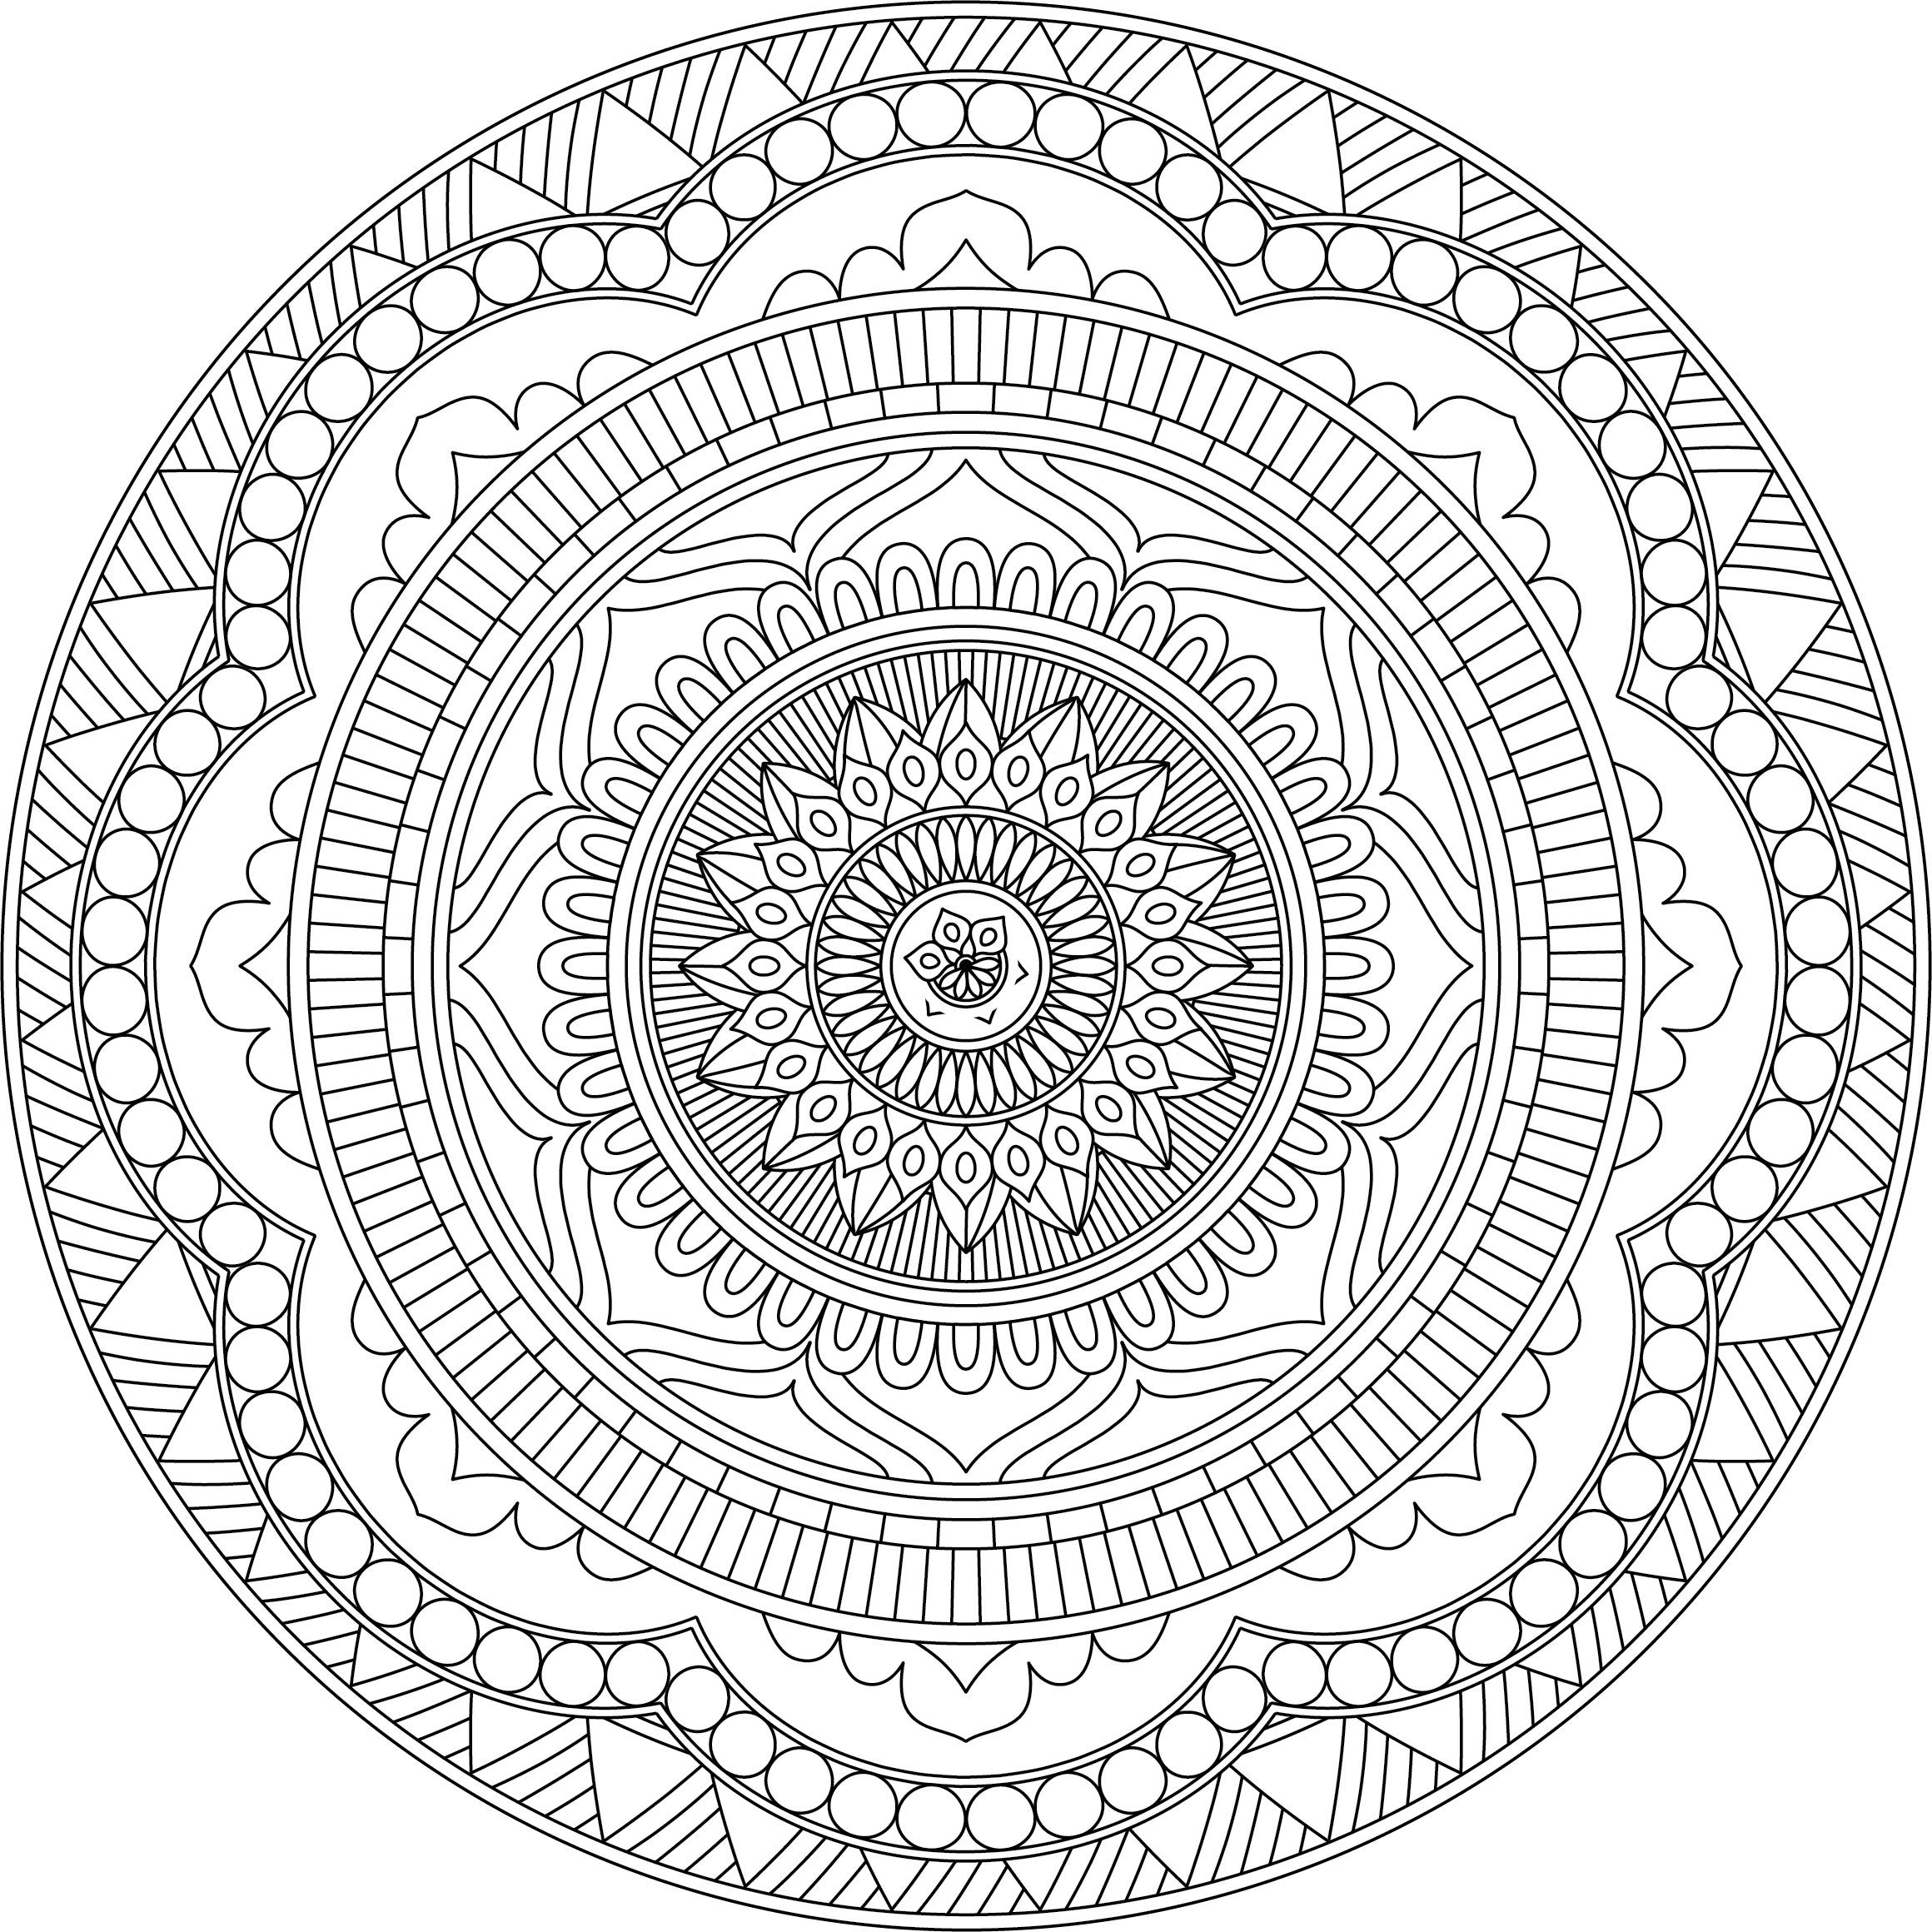 Stress relief coloring printable young adult coloring book printable x pdf mandala coloring pages anti stress colouring pages